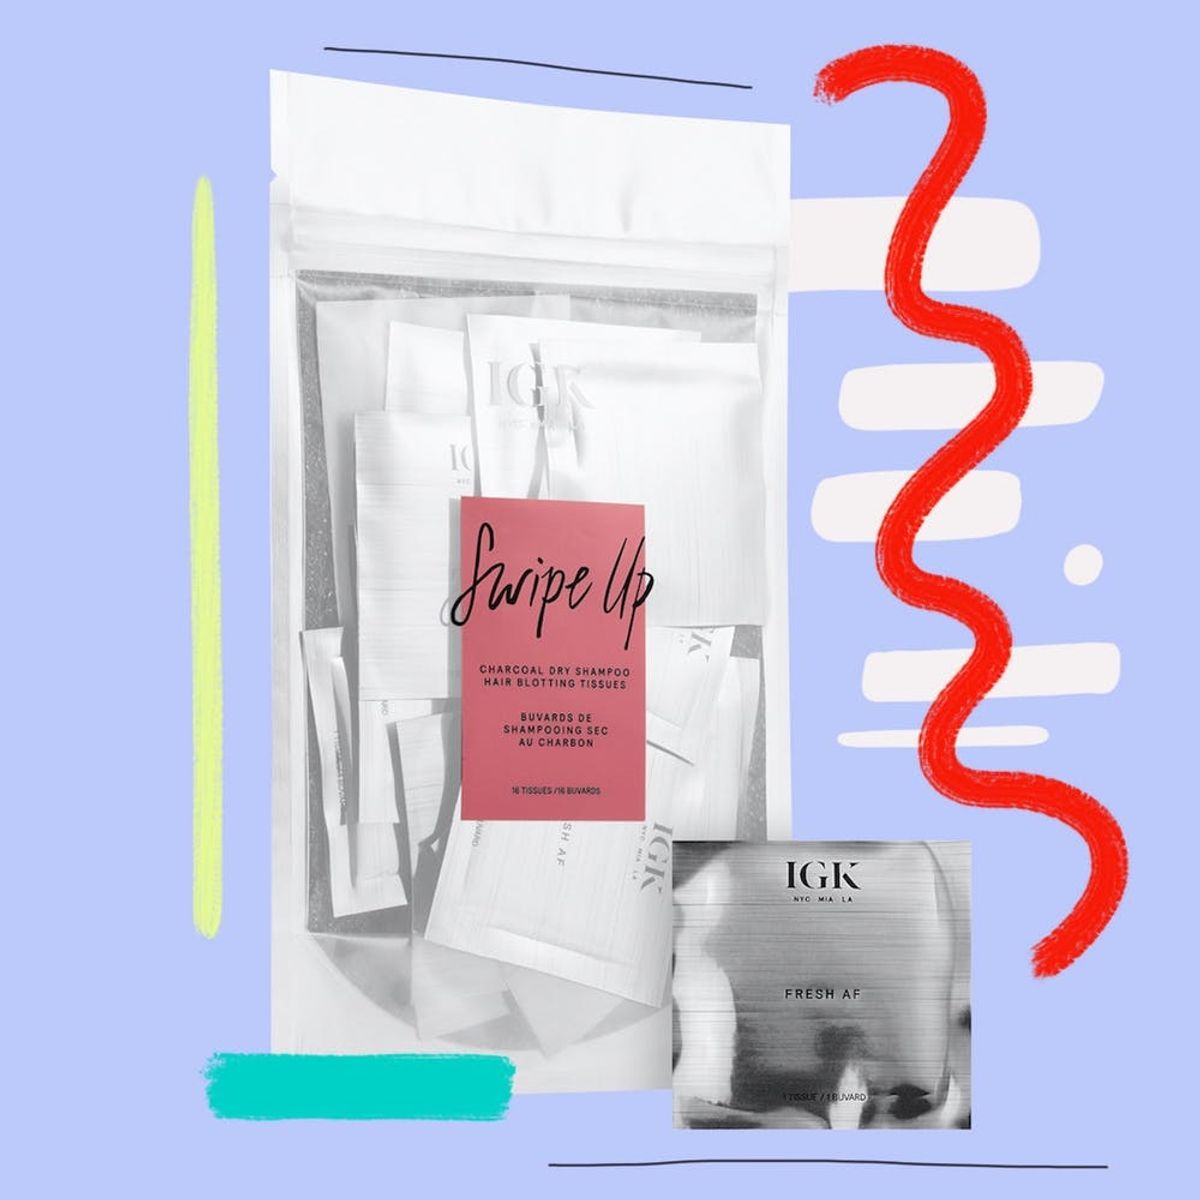 Hair Sheets Might Be the Answer to Your Bad Hair Days